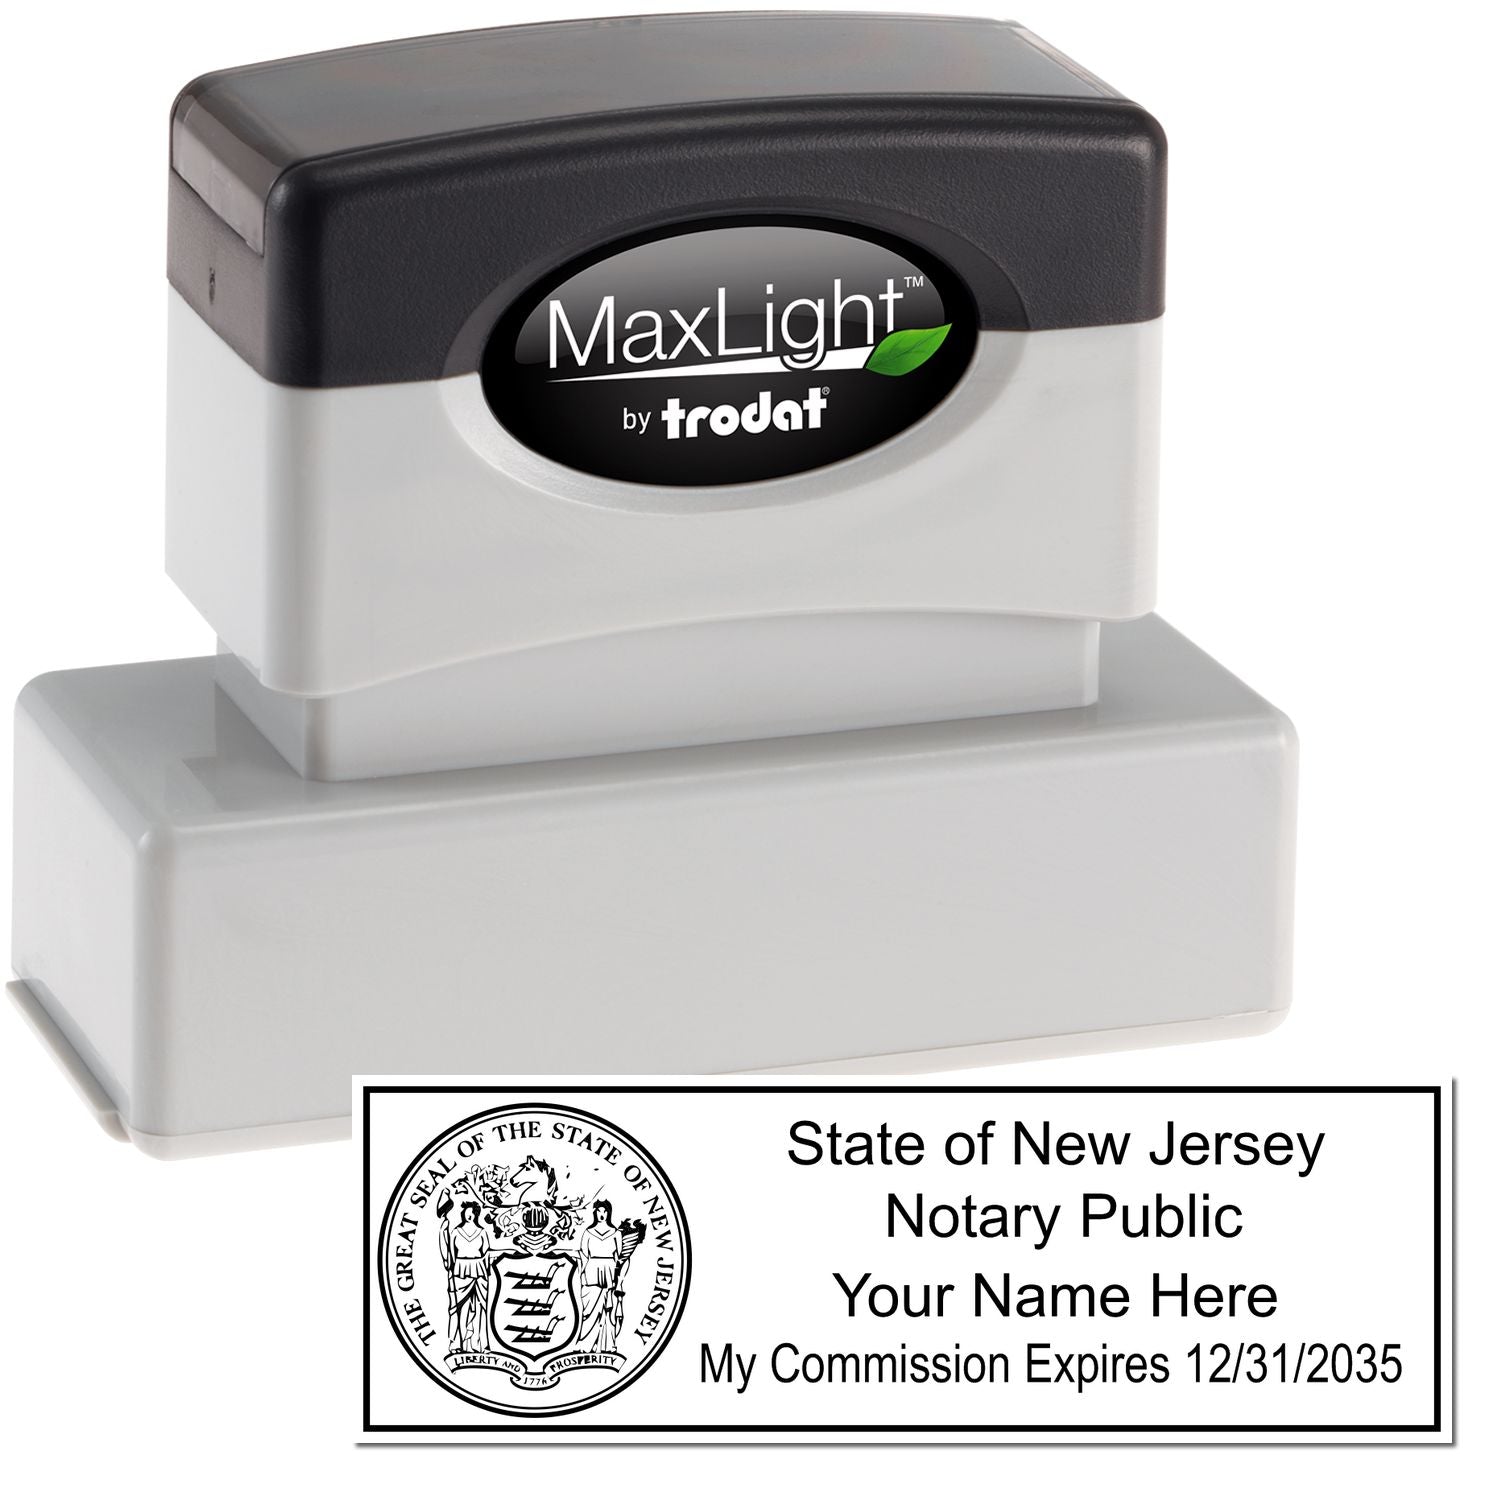 The main image for the MaxLight Premium Pre-Inked New Jersey State Seal Notarial Stamp depicting a sample of the imprint and electronic files